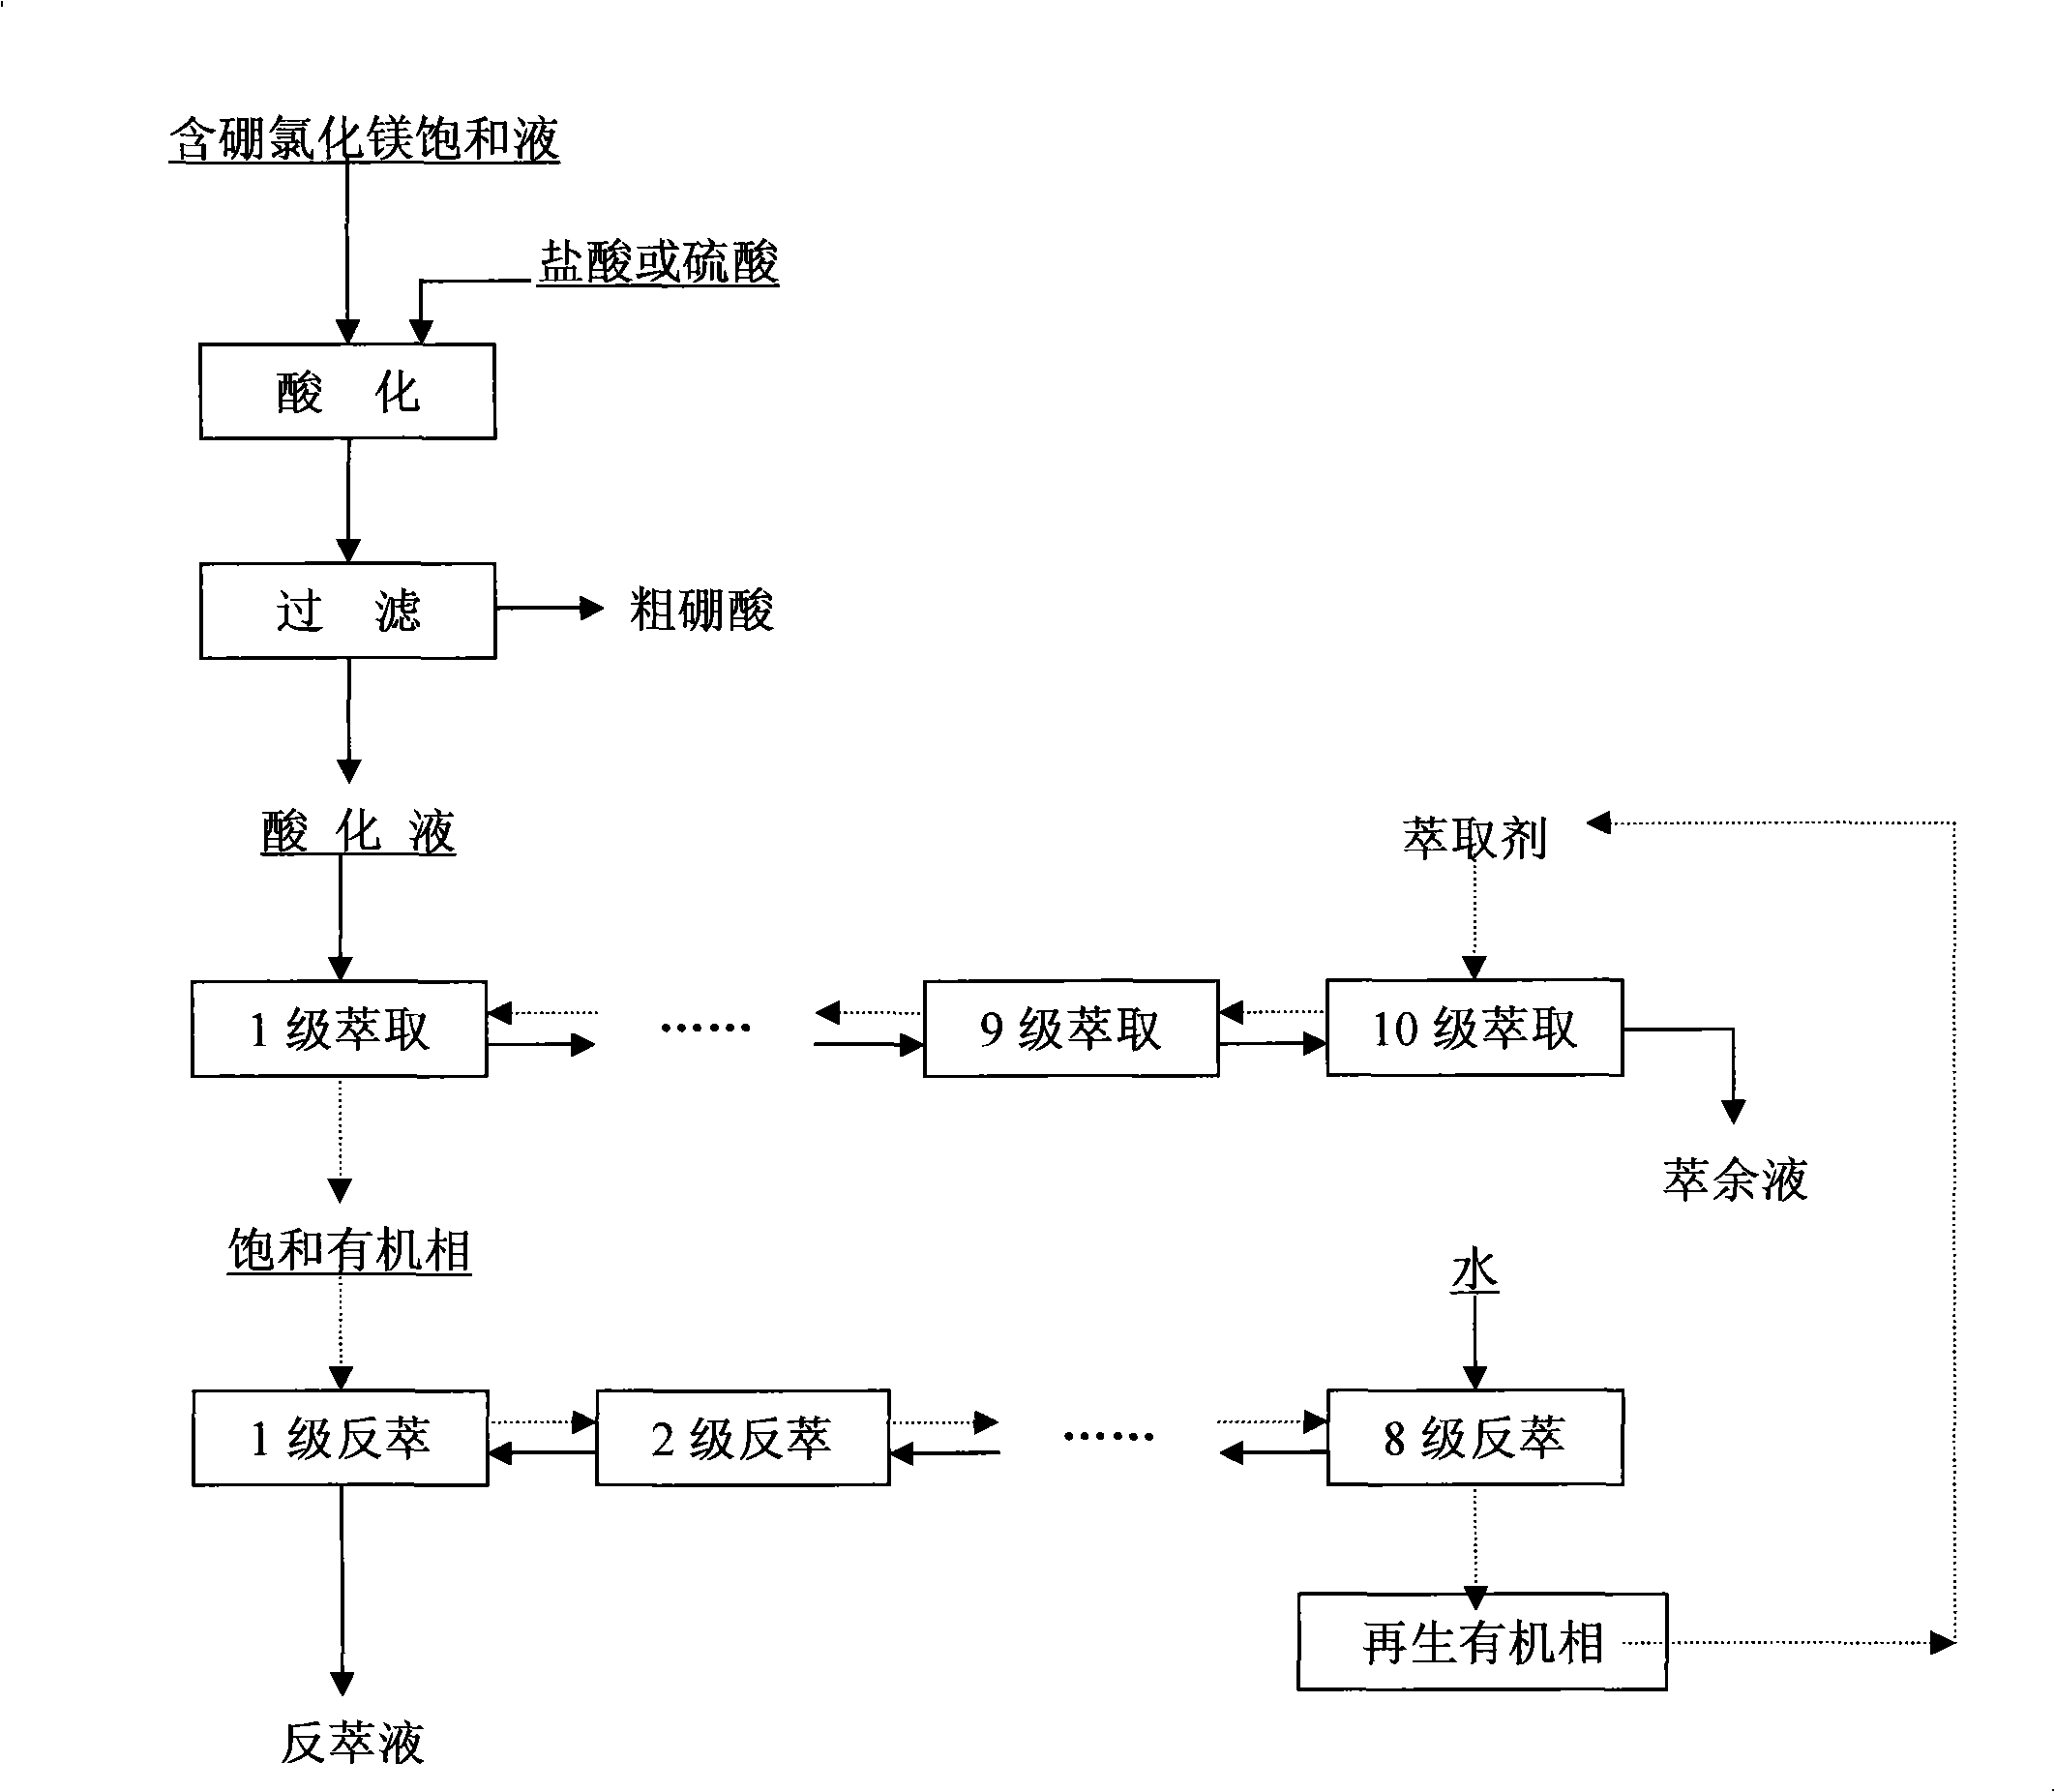 Method for removing boron and iron from boron containing magnesium chloride saturated liquid